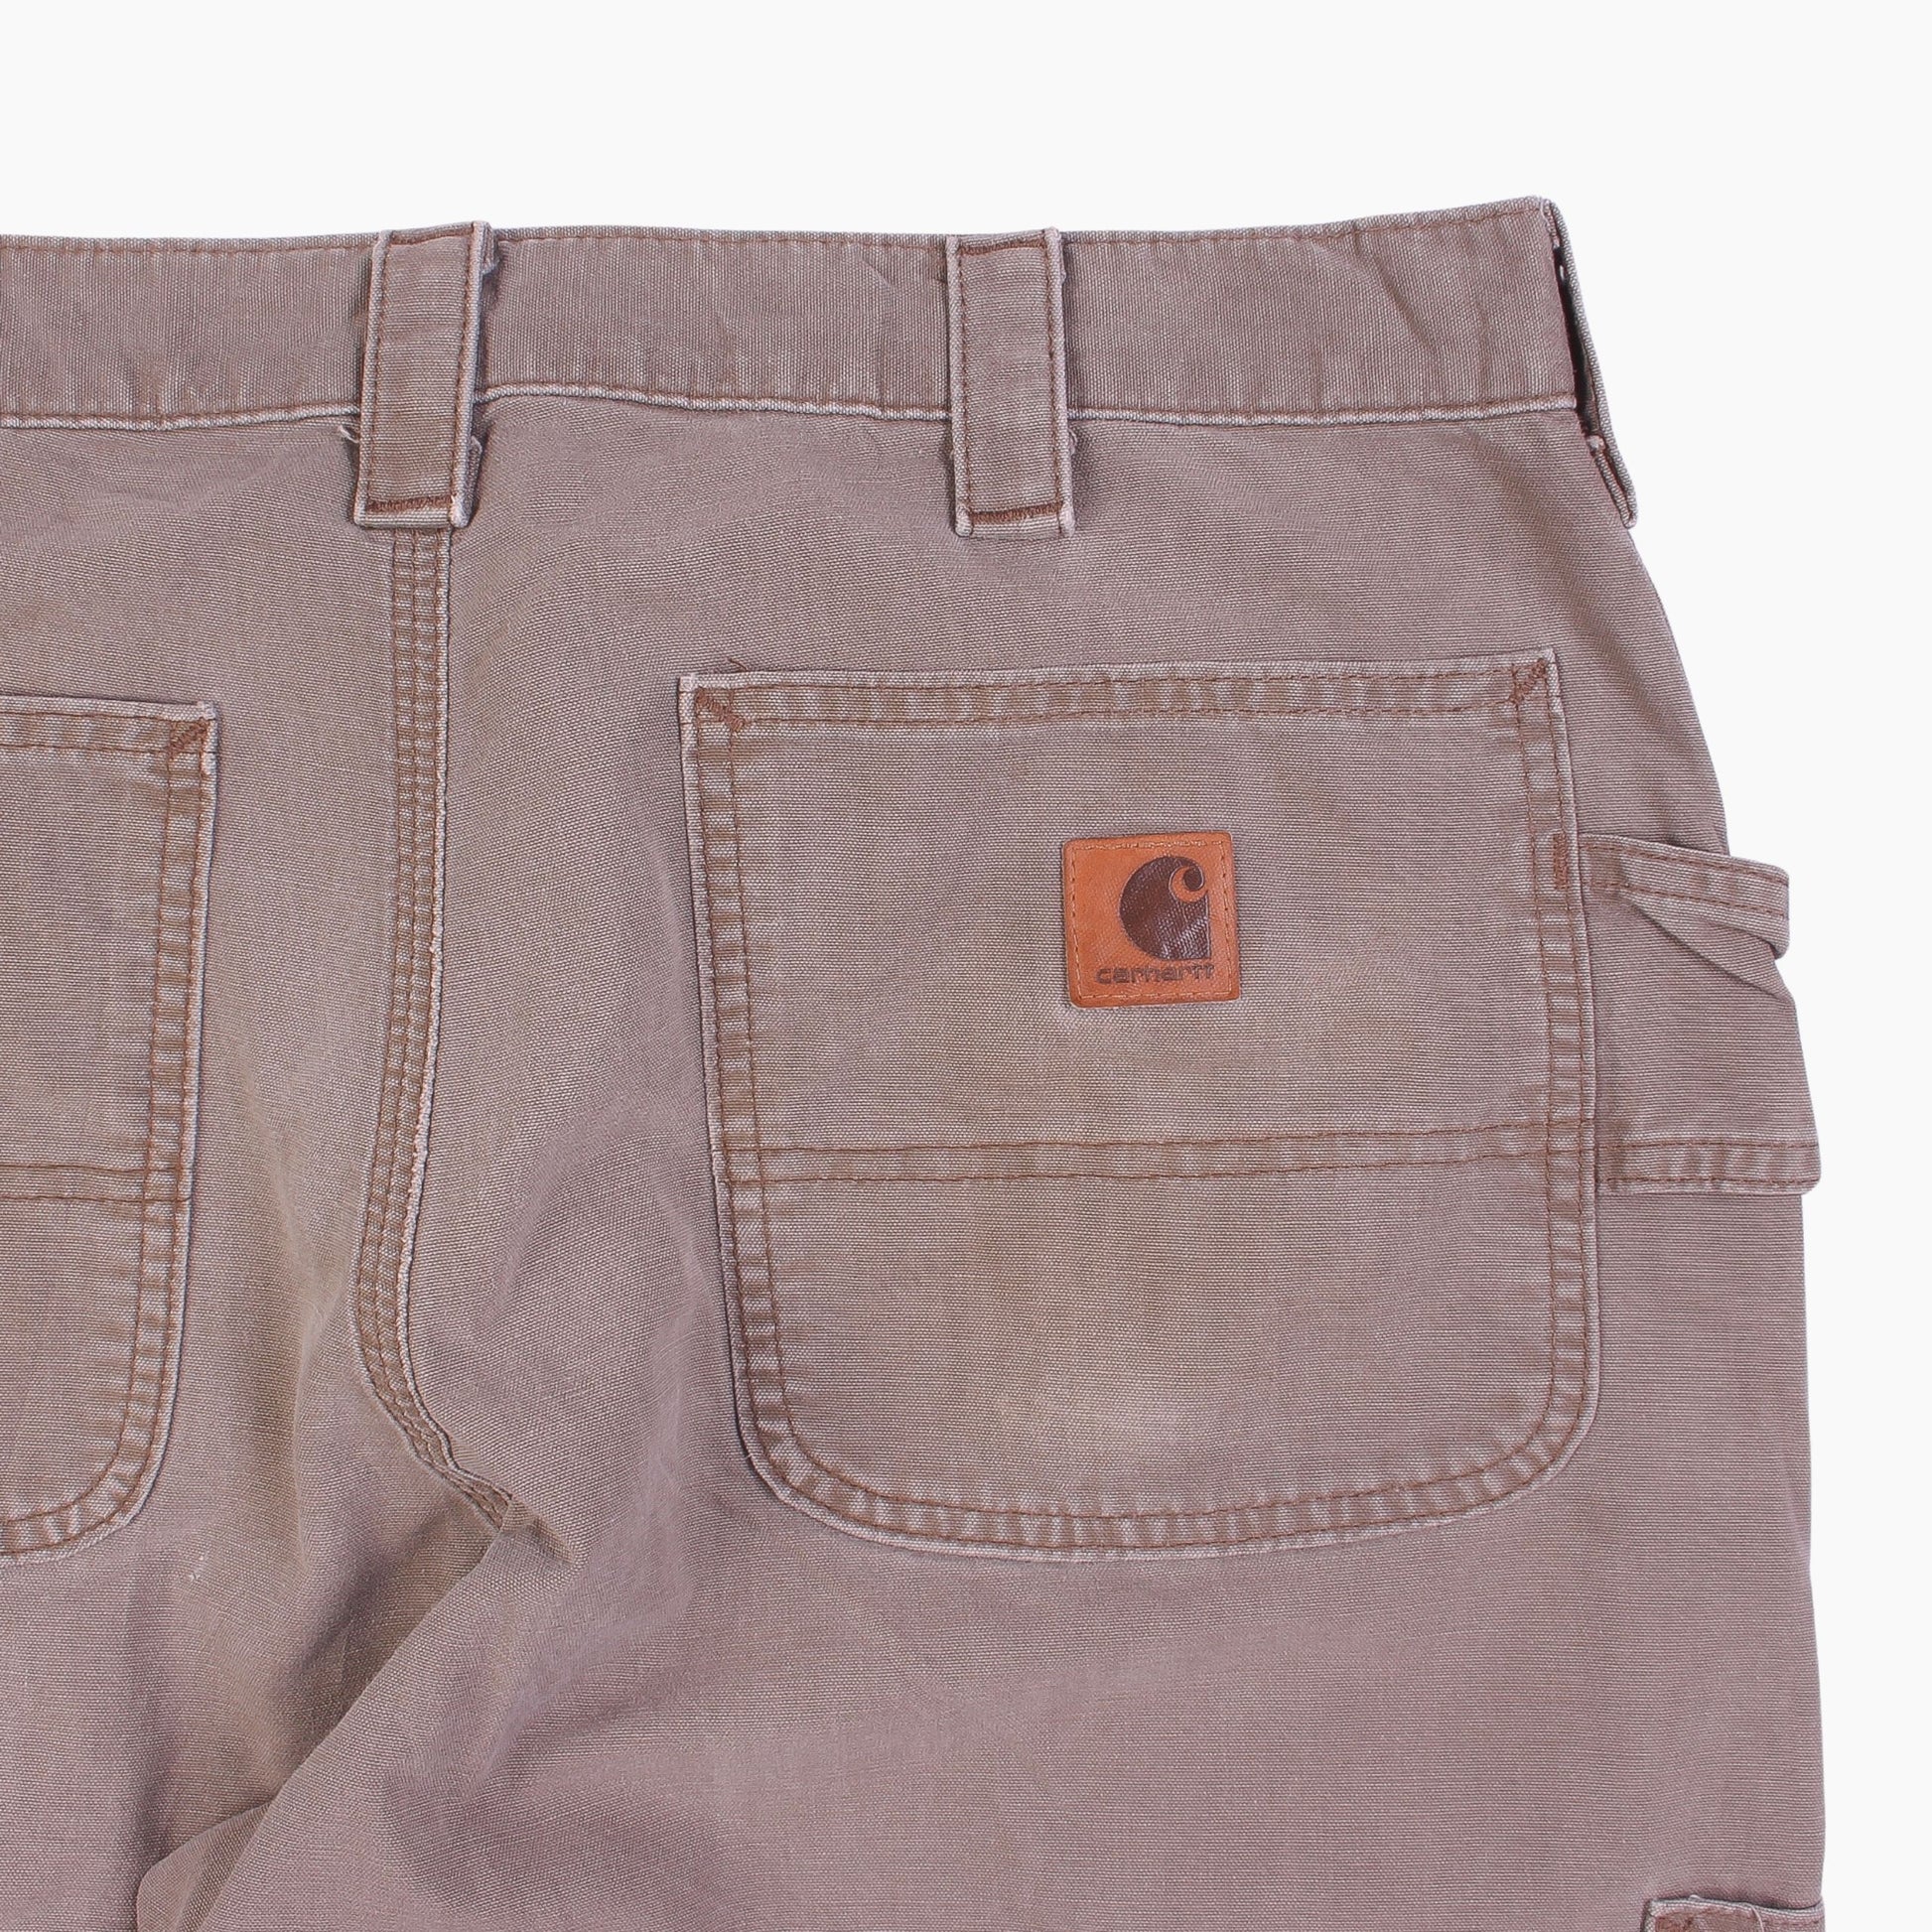 Vintage Carhartt Carpenter Pants - Washed Brown - 34/30 - American Madness